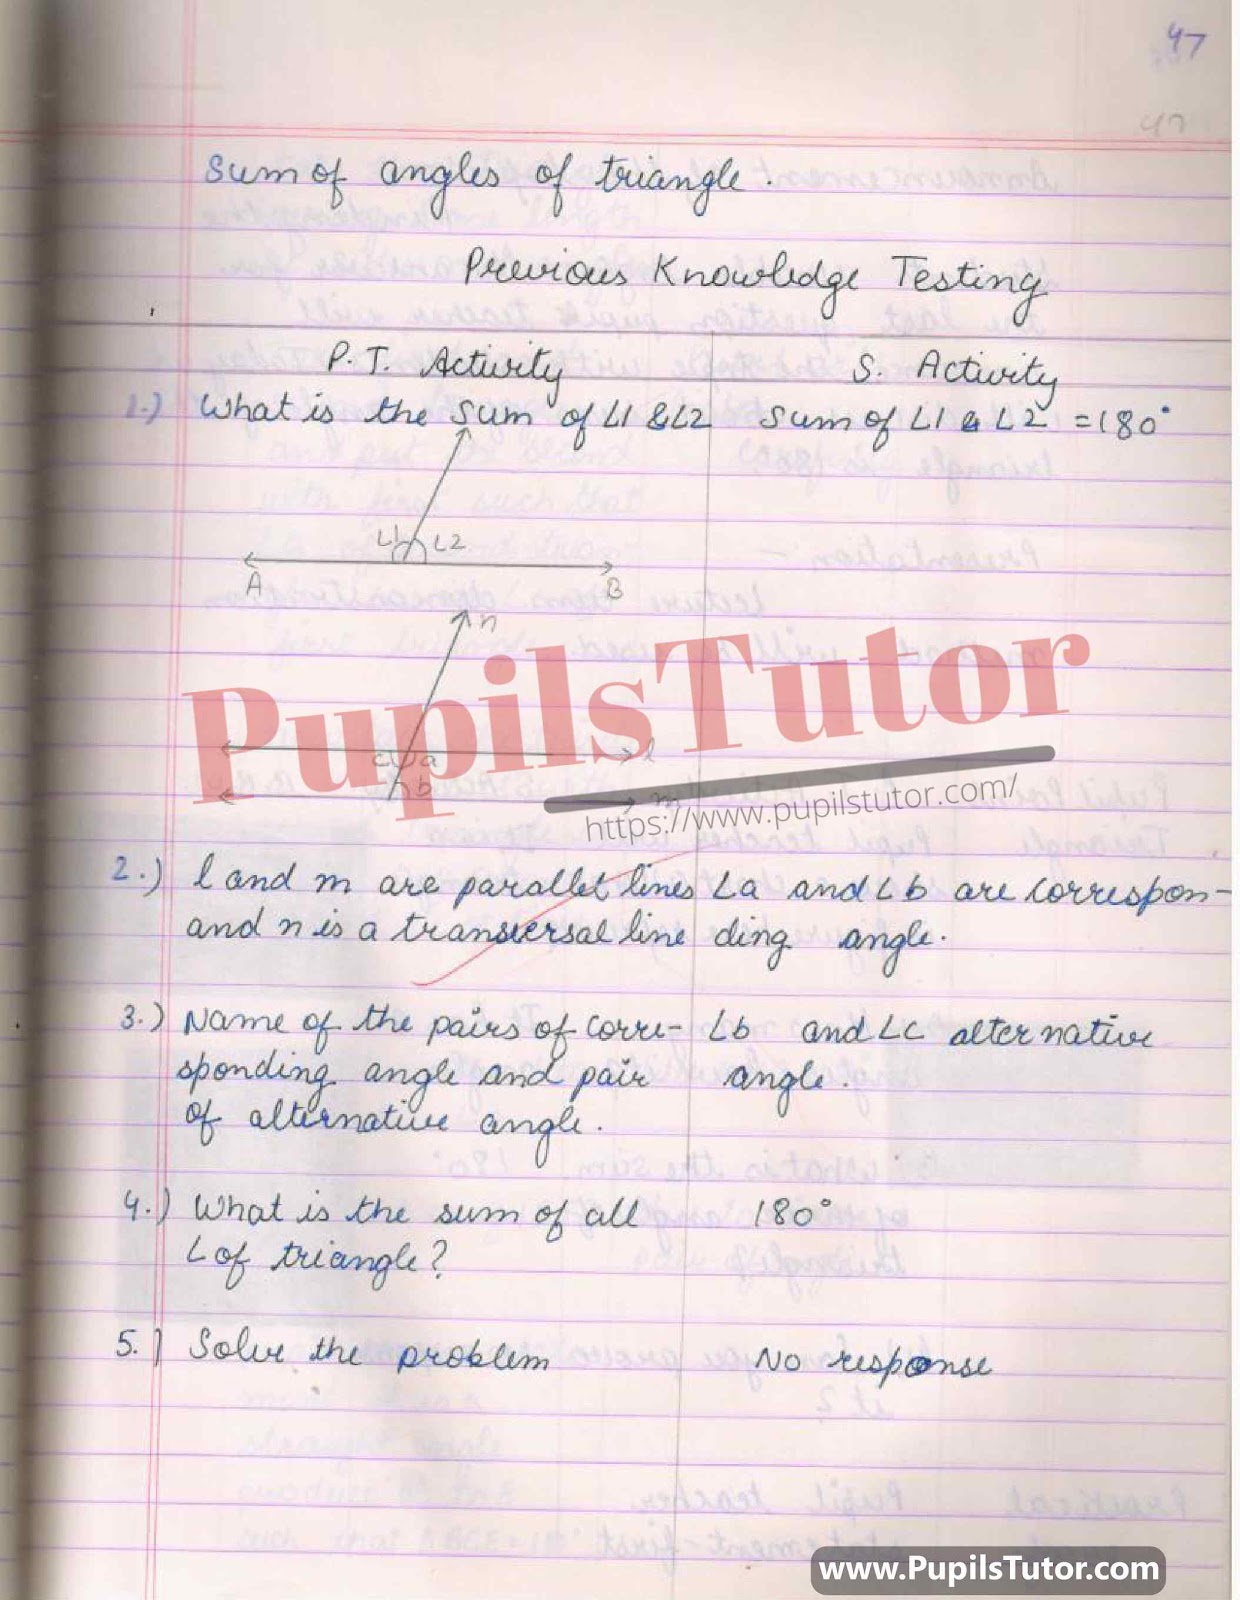 Math Lesson Plan On Sum Of The Angles Of A Triangle For Class/Grade 9 For CBSE NCERT School And College Teachers  – (Page And Image Number 3) – www.pupilstutor.com